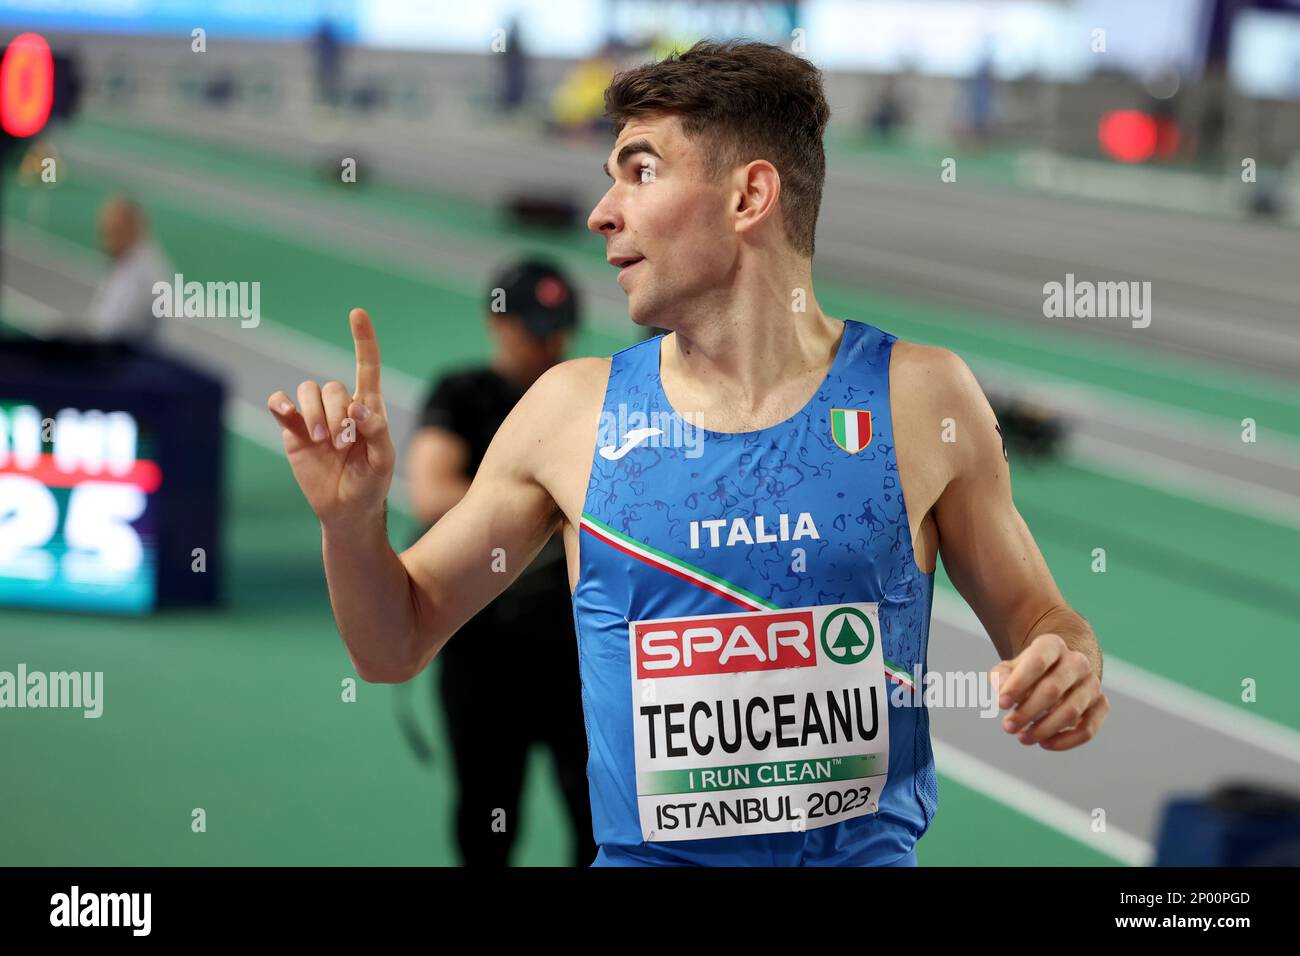 Catalin Tecuceanu, of Italy, reacts after winning his Men 800 meters heat at the European Athletics Indoor Championships at Atakoy Arena in Istanbul, Turkey, Thursday, March 2, 2023